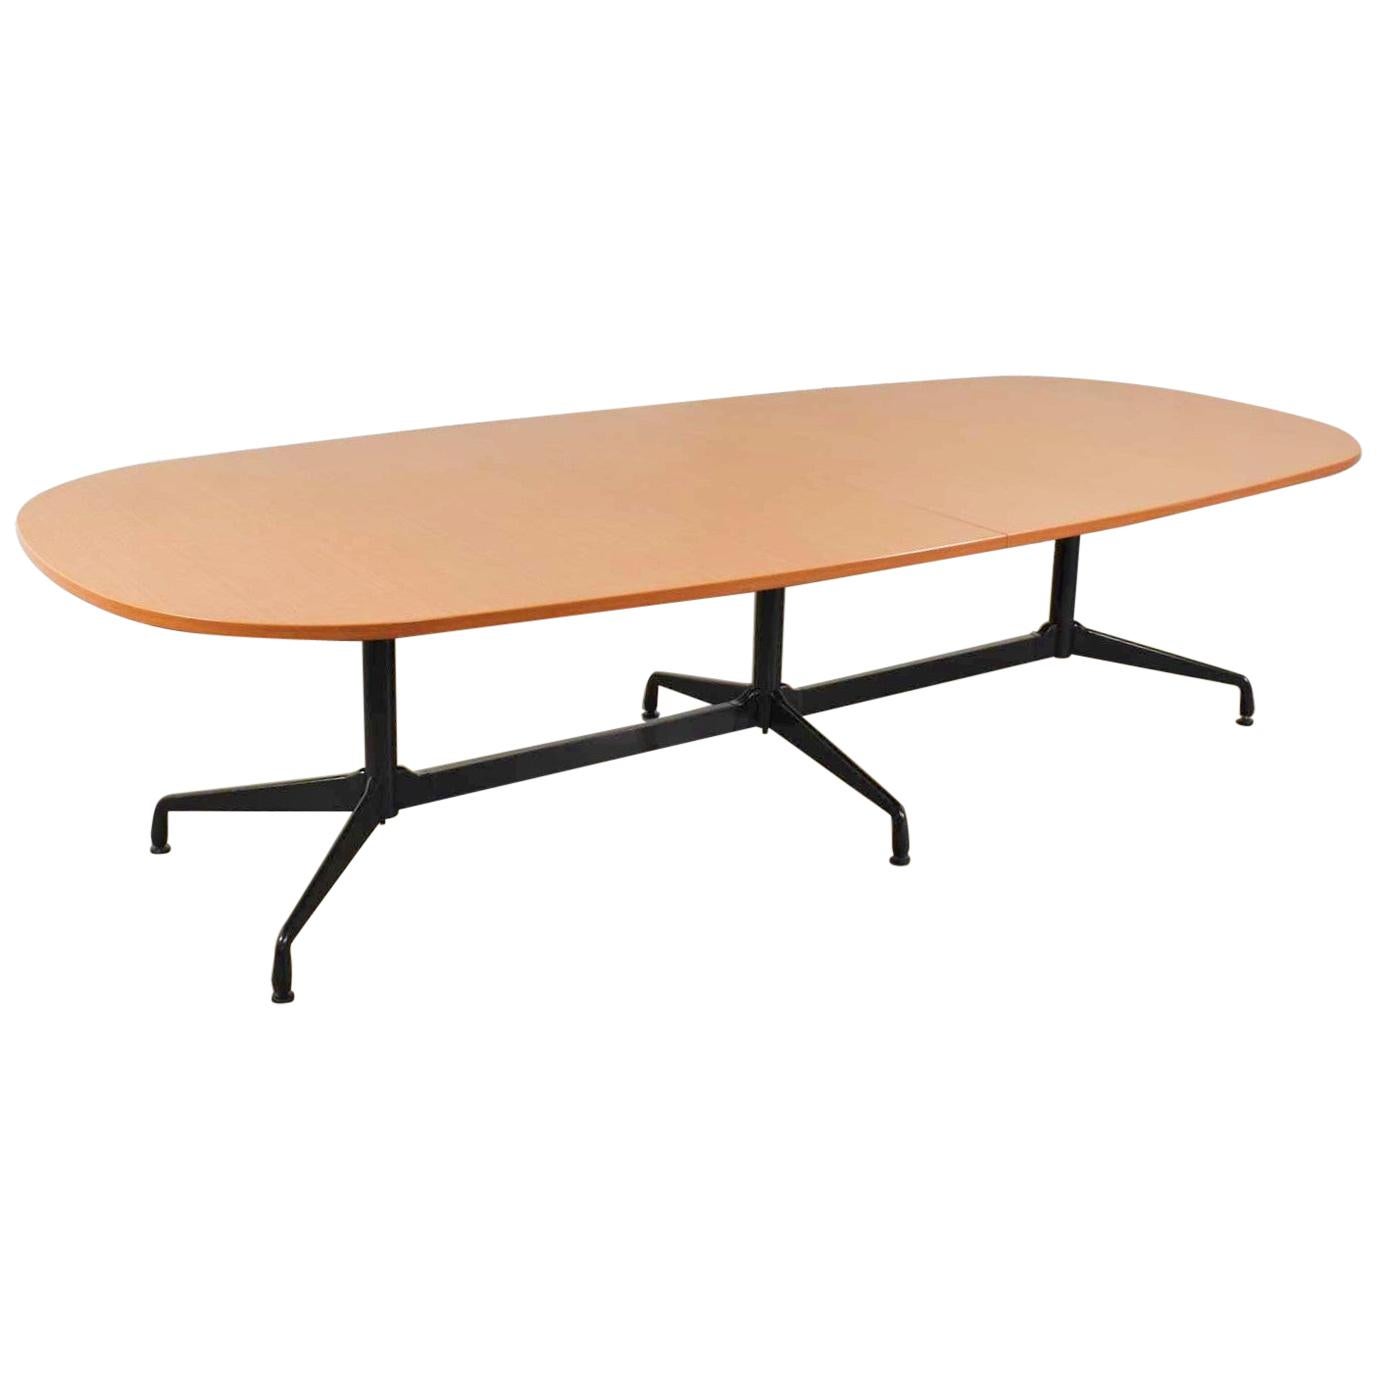 Extra Long Segmented Base Elliptical Table by Eames for Herman Miller